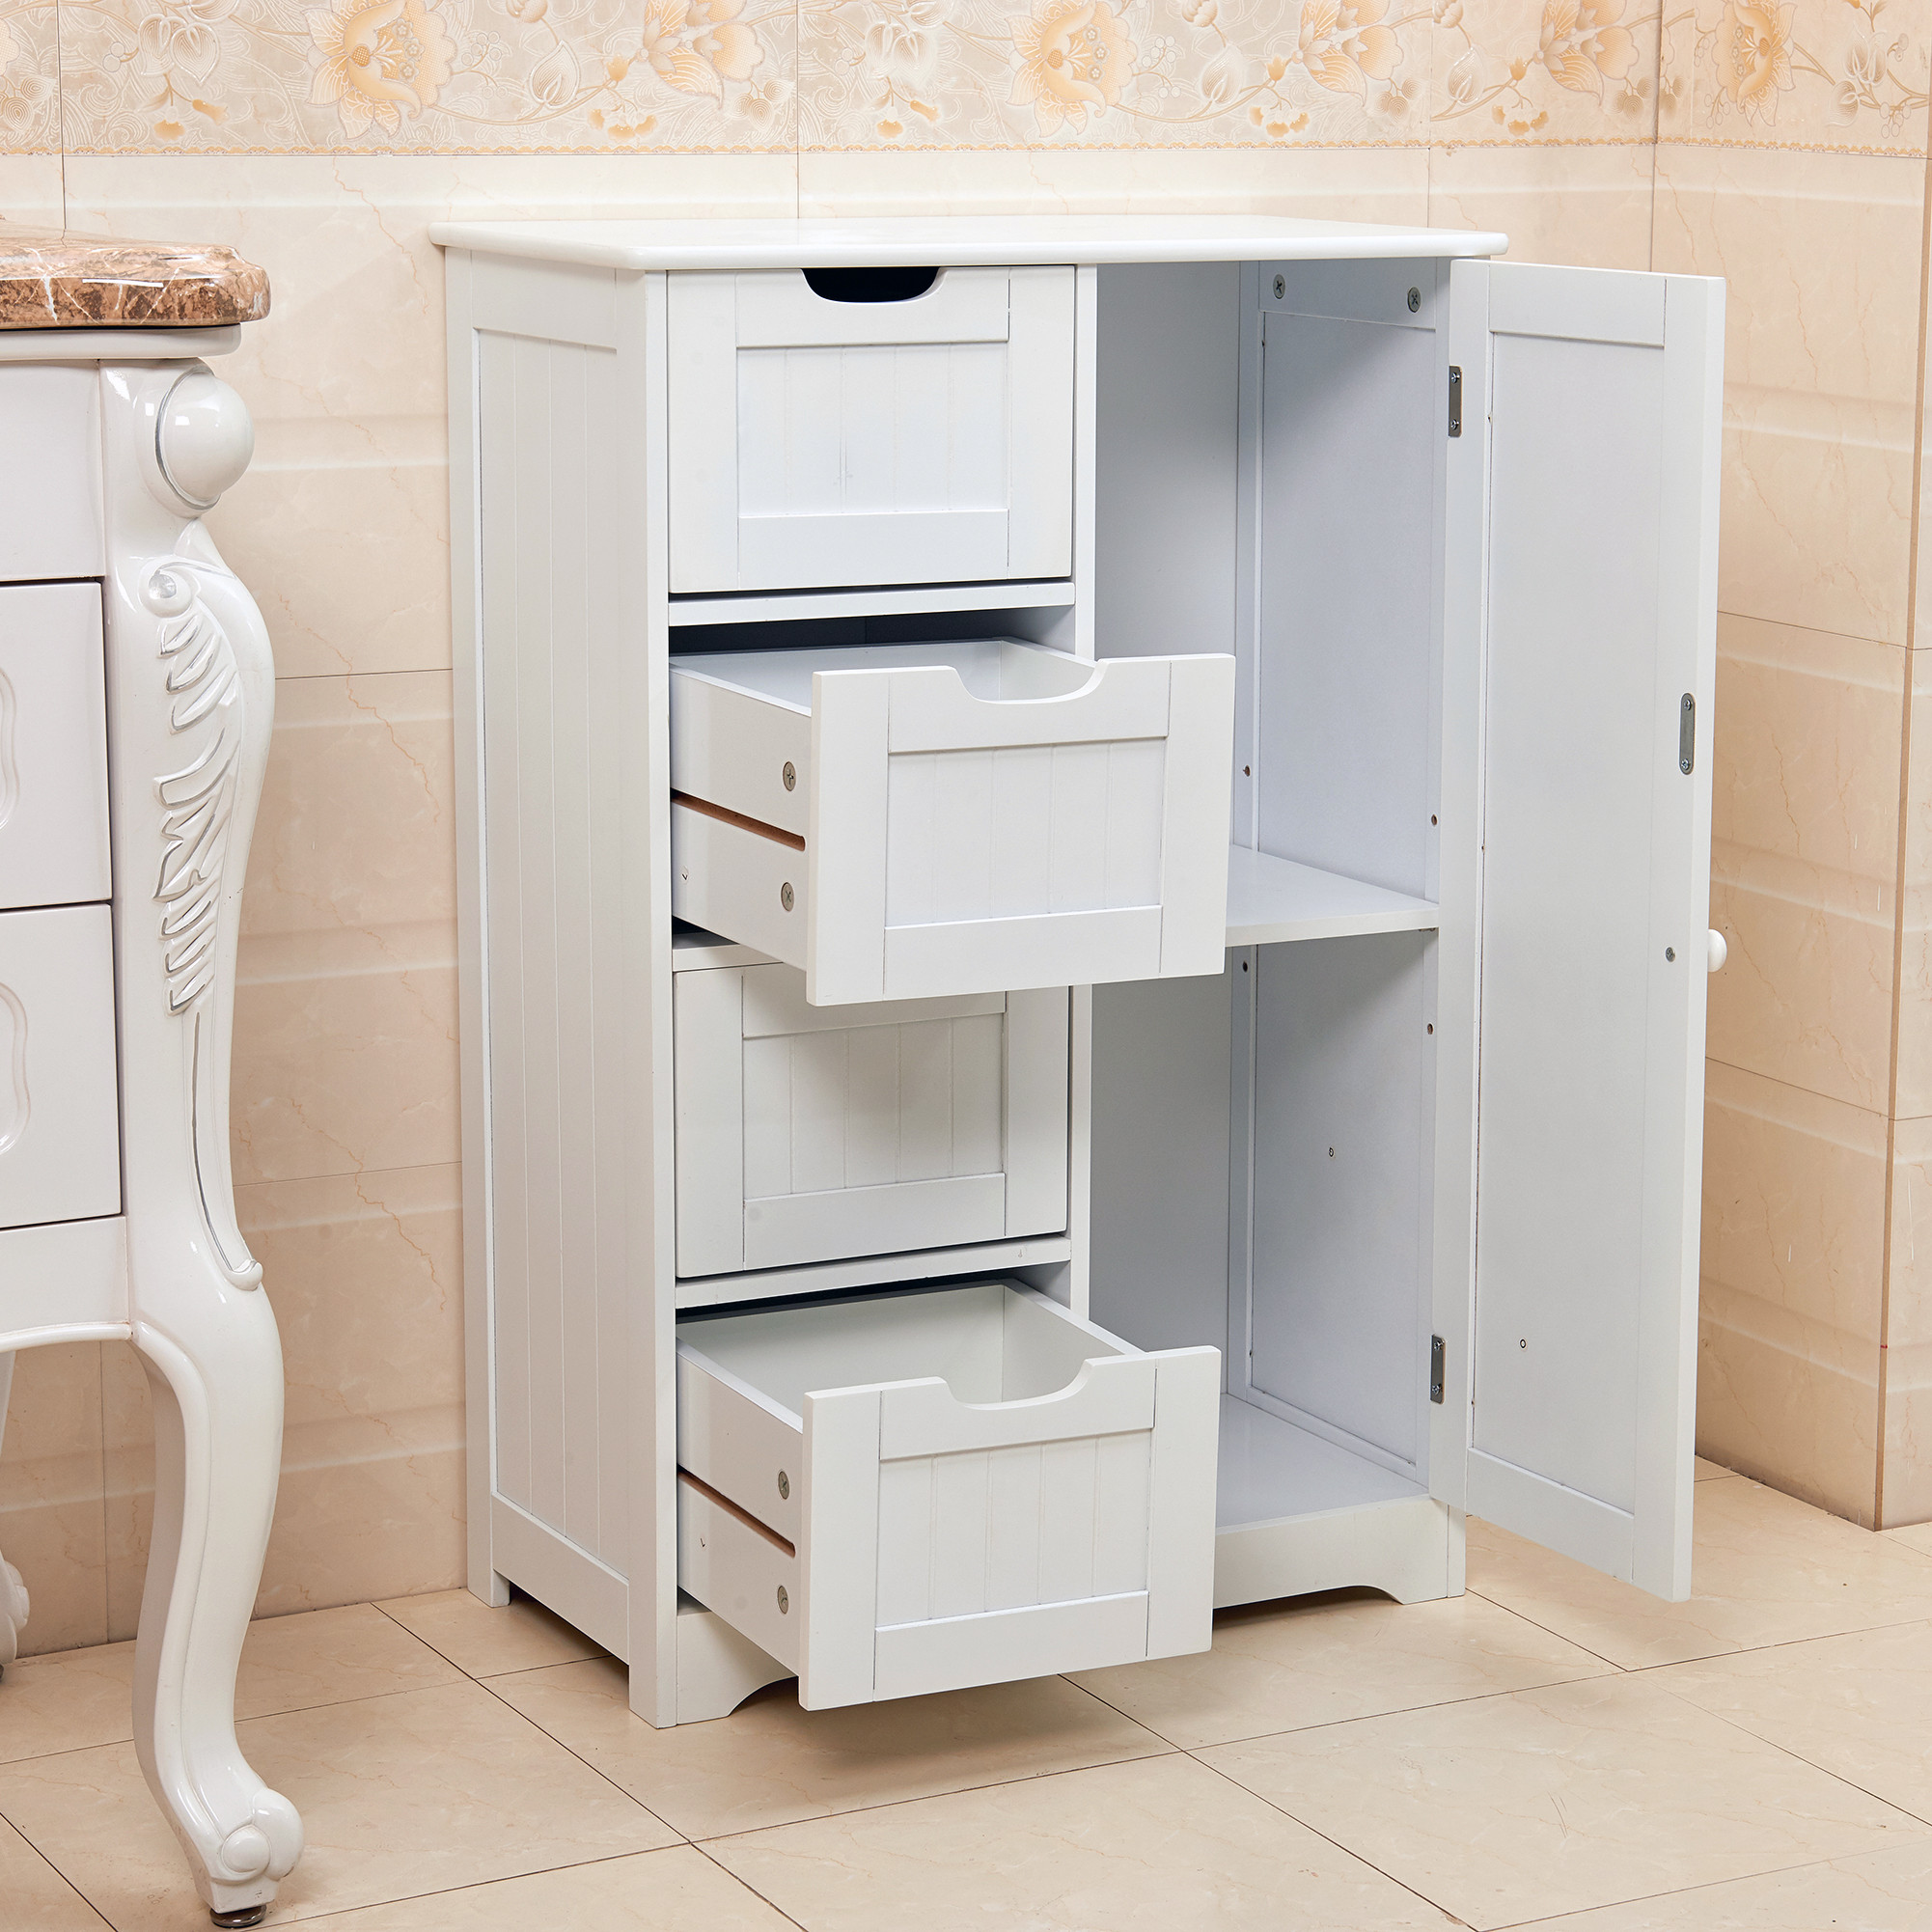 Storage Cabinets For Bathroom
 White Wooden 4 Drawer Bathroom Storage Cupboard Cabinet